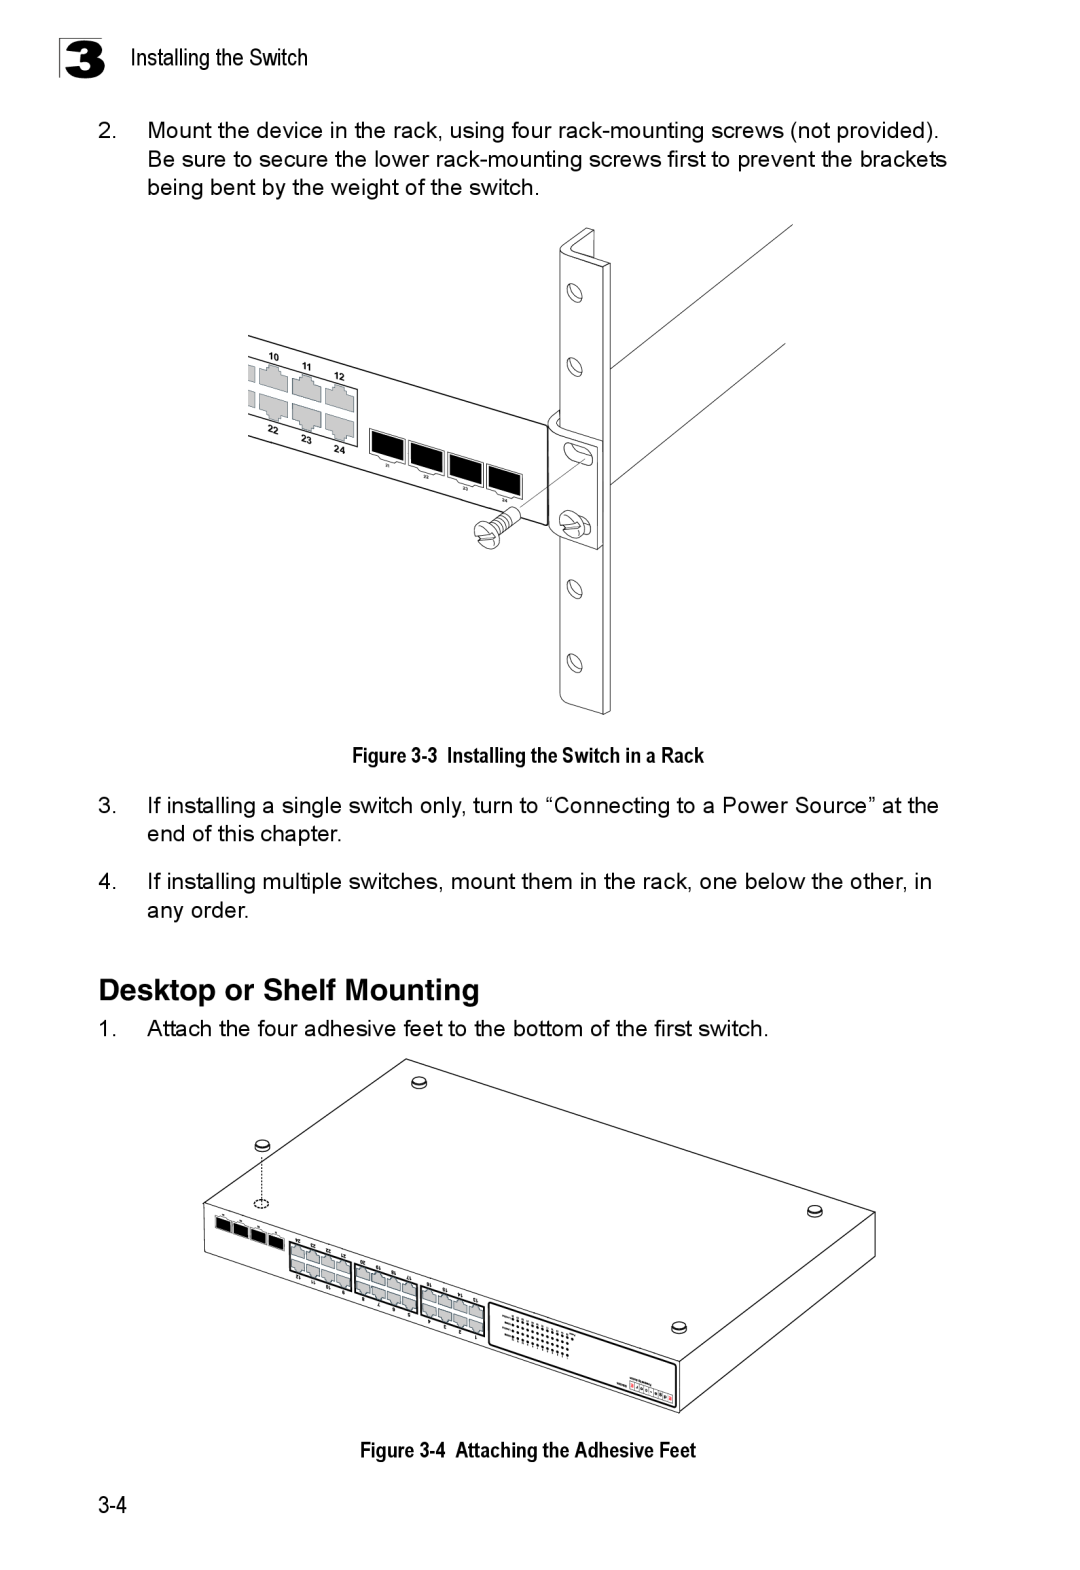 Accton Technology ES4324 manual Desktop or Shelf Mounting, 3 Installing the Switch in a Rack, 4 Attaching the Adhesive Feet 